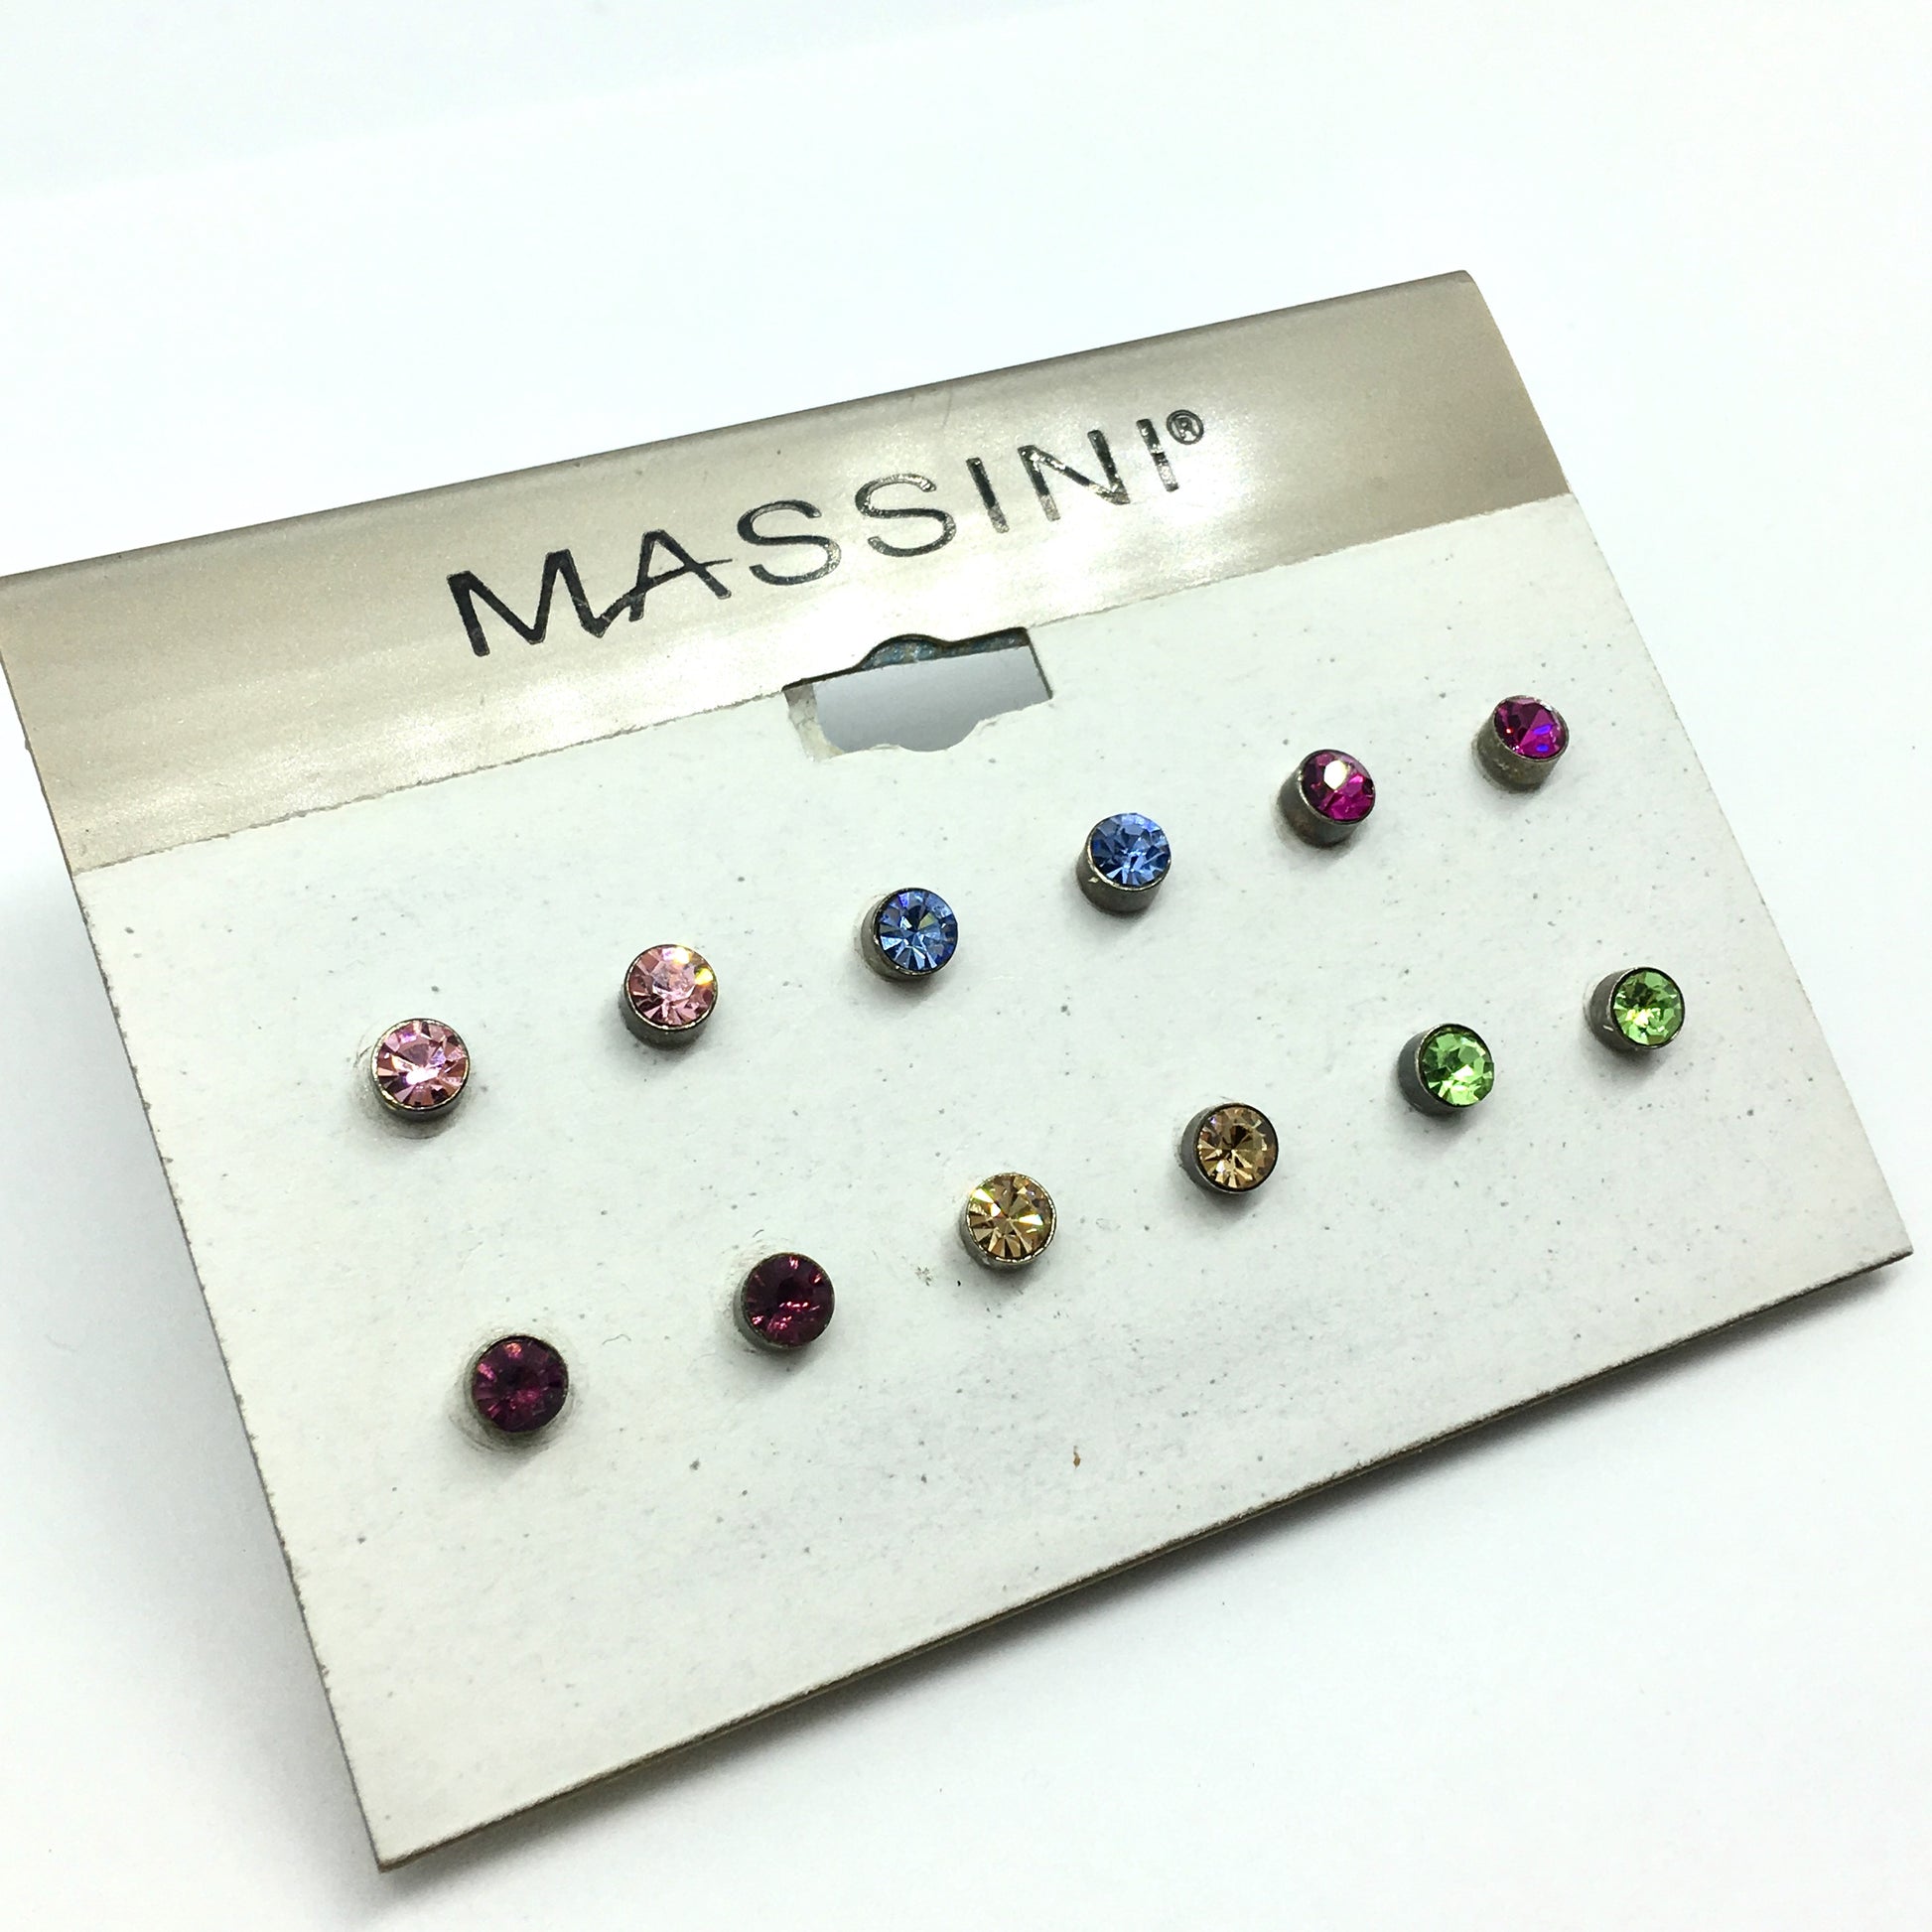 Discount Jewelry | Variety Pack of 6 pairs 4 mm Colorful Crystal Stud Earrings online at Blingschlingers.com in USA